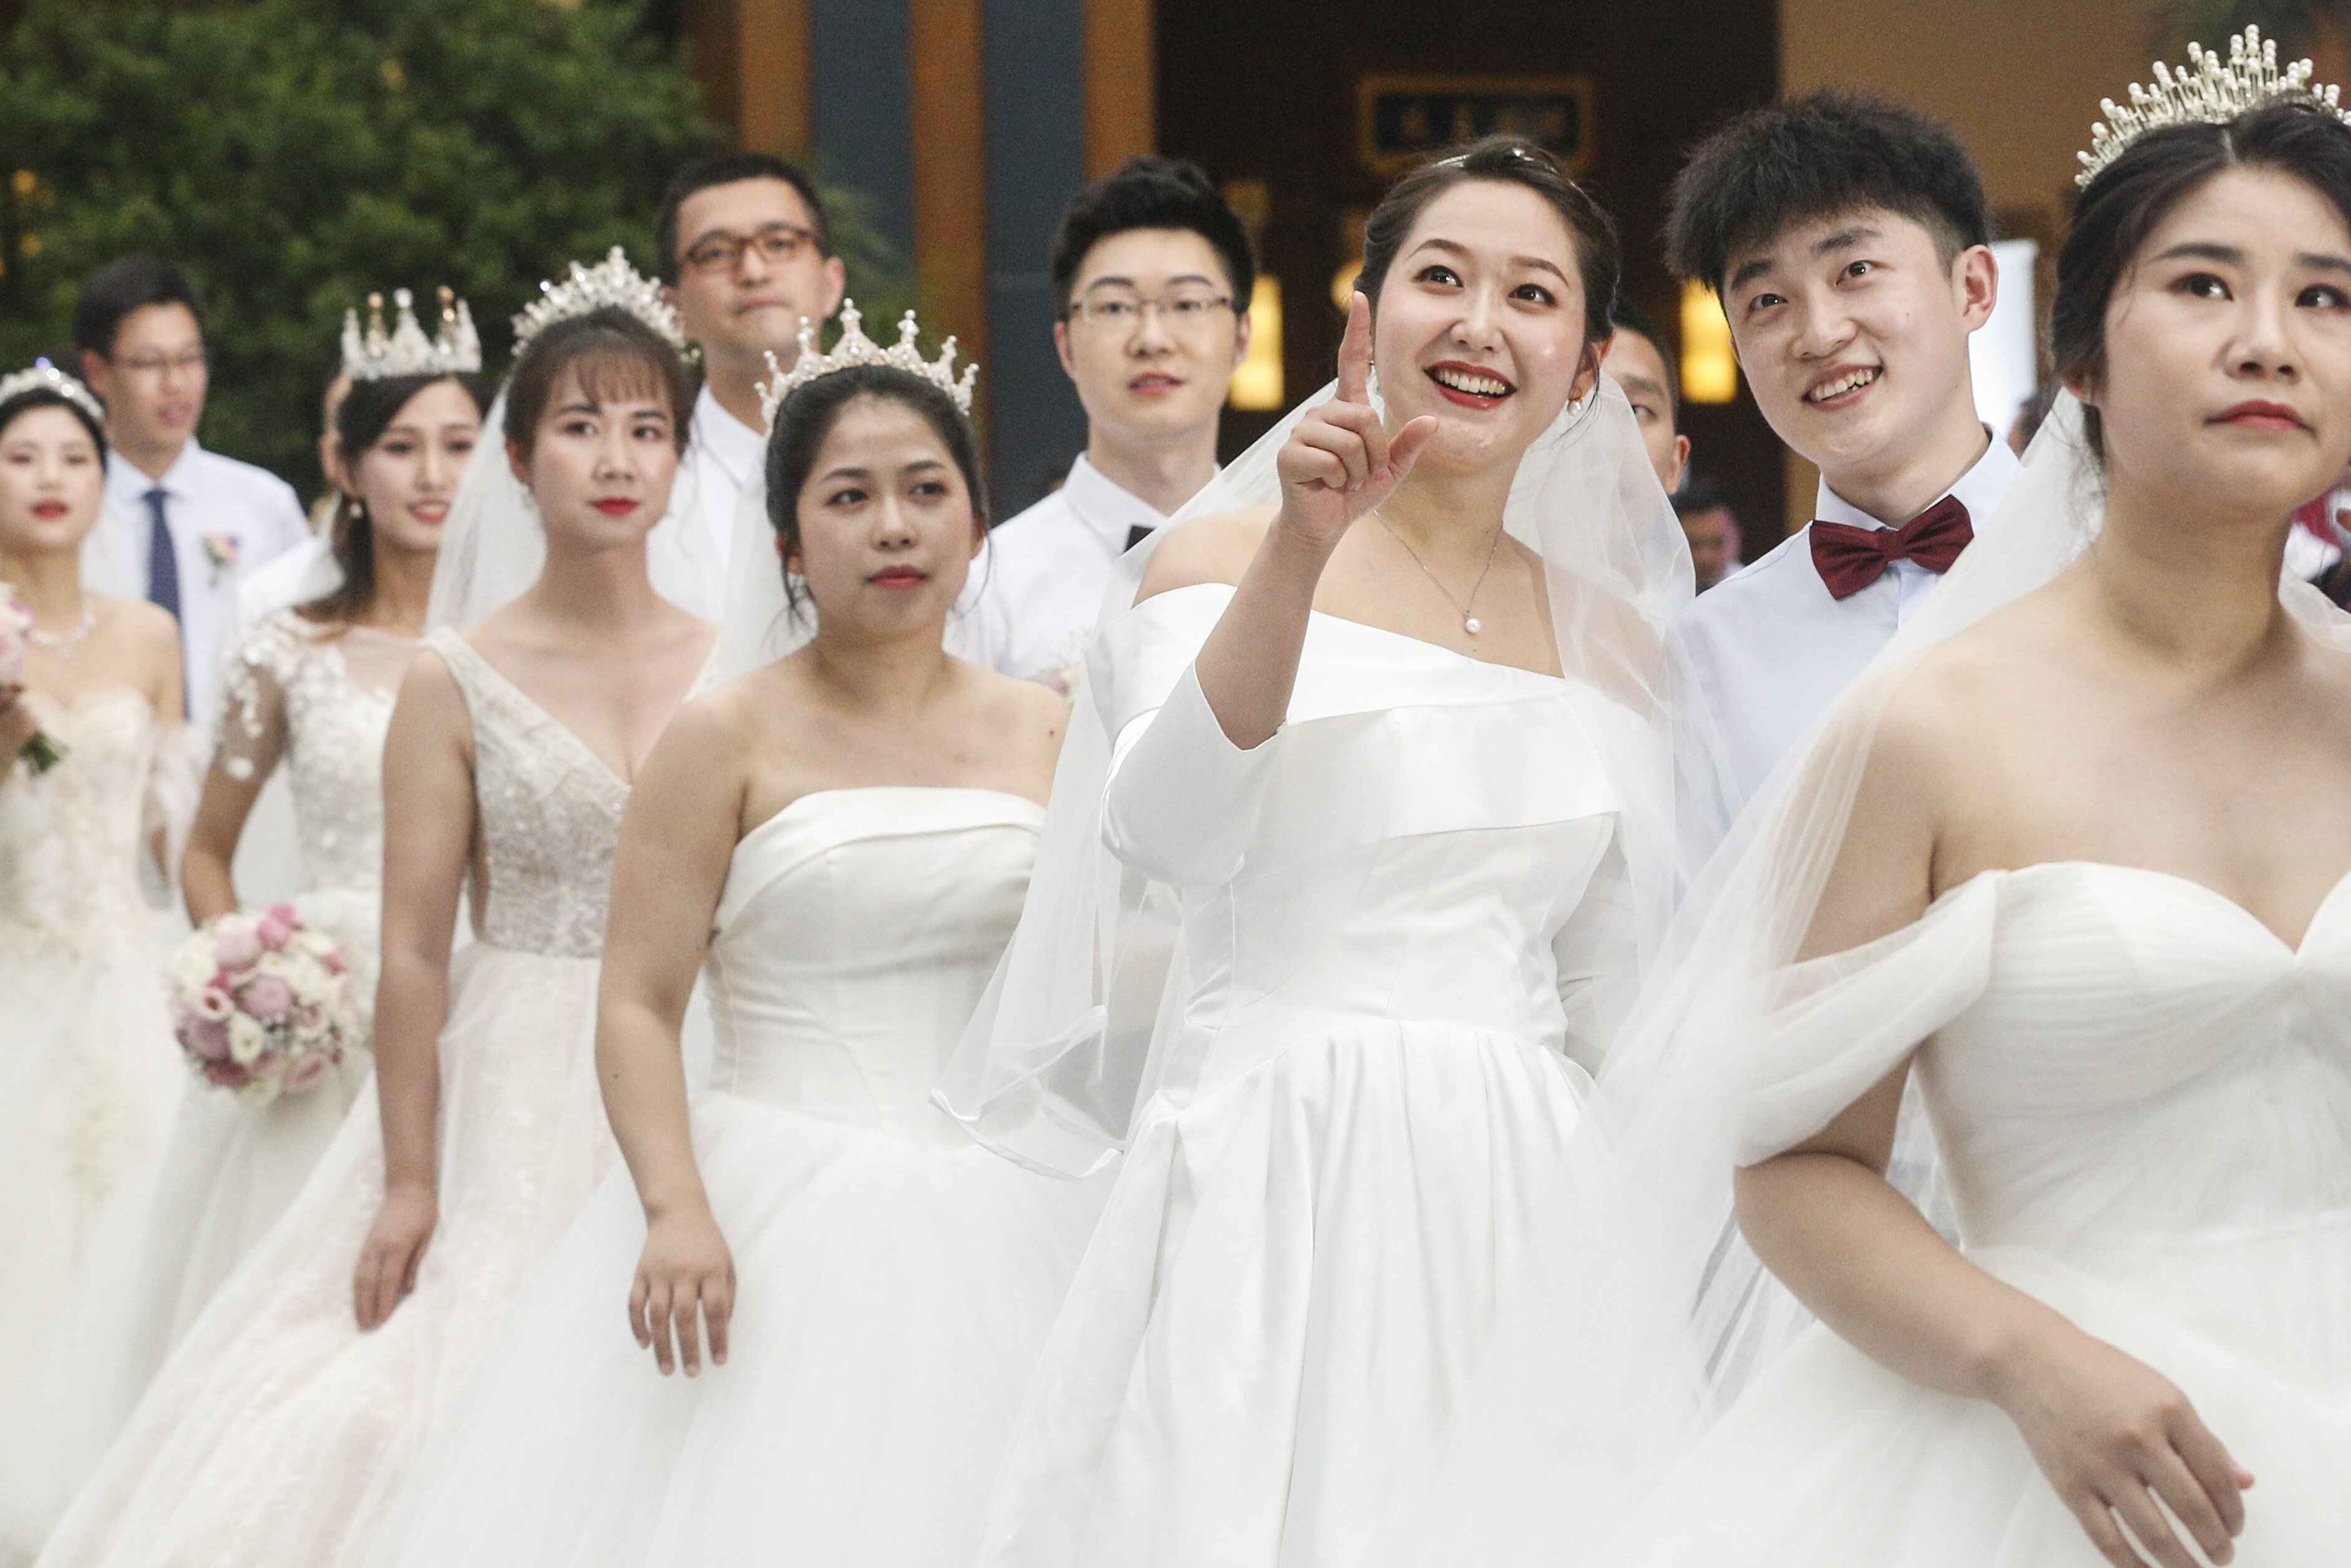 Couples get ready to attend a group wedding ceremony in Boao, Hainan province, on June 6, 2020. Some Chinese feminists reject the institution of marriage, which they regard as the root of patriarchy. Photo: Xinhua